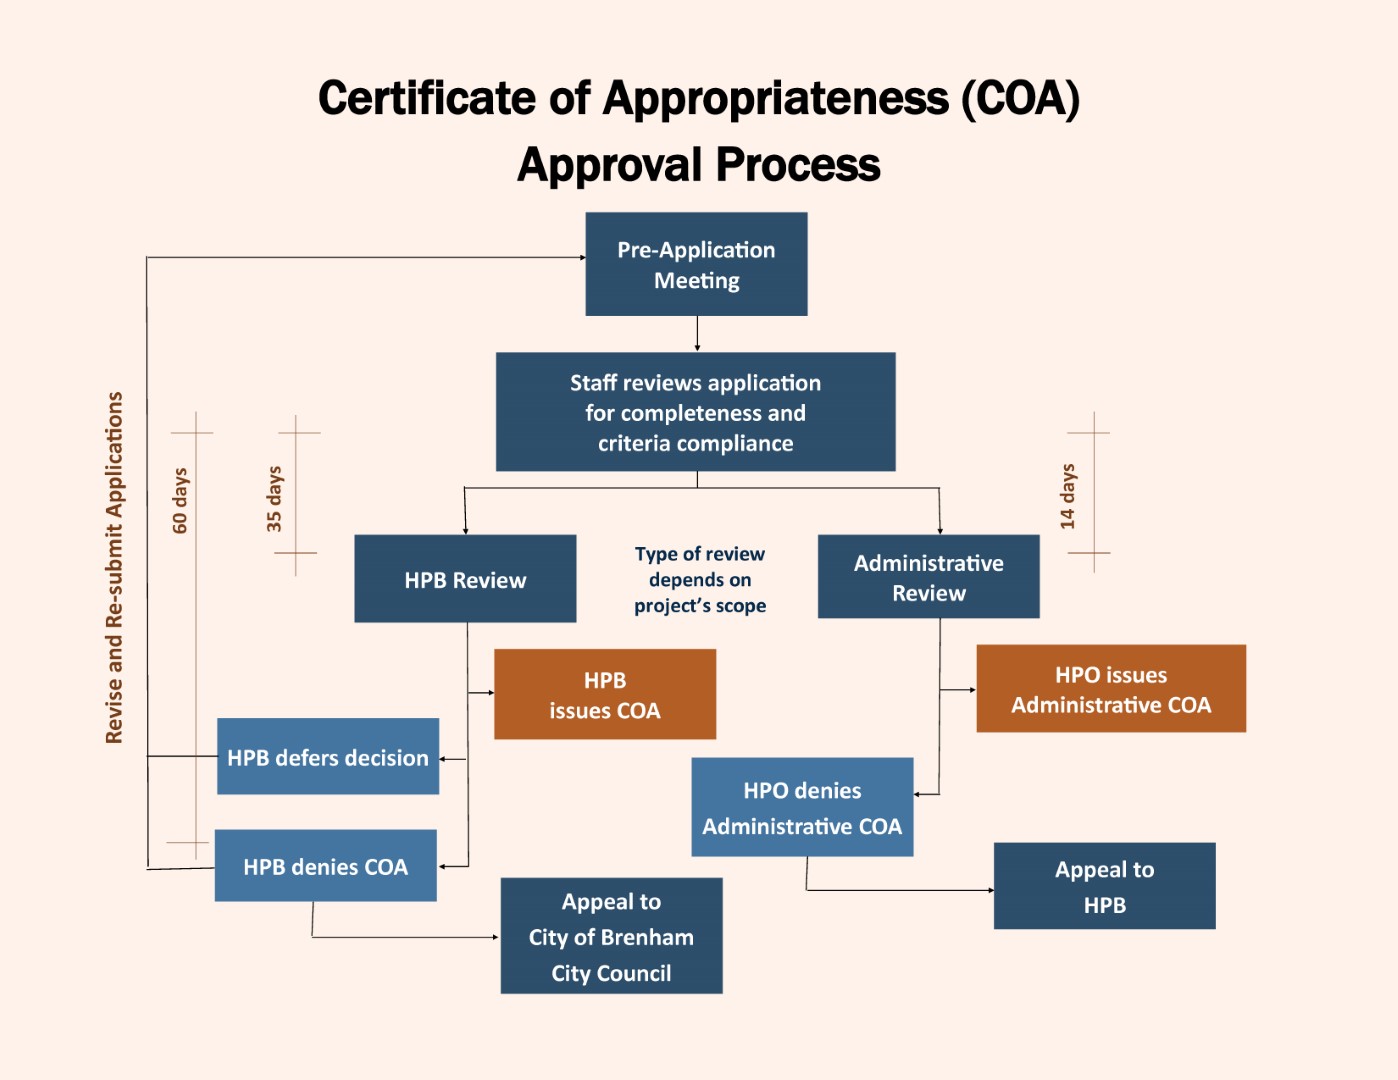 COA Approval Process Chart click for pdf of chart